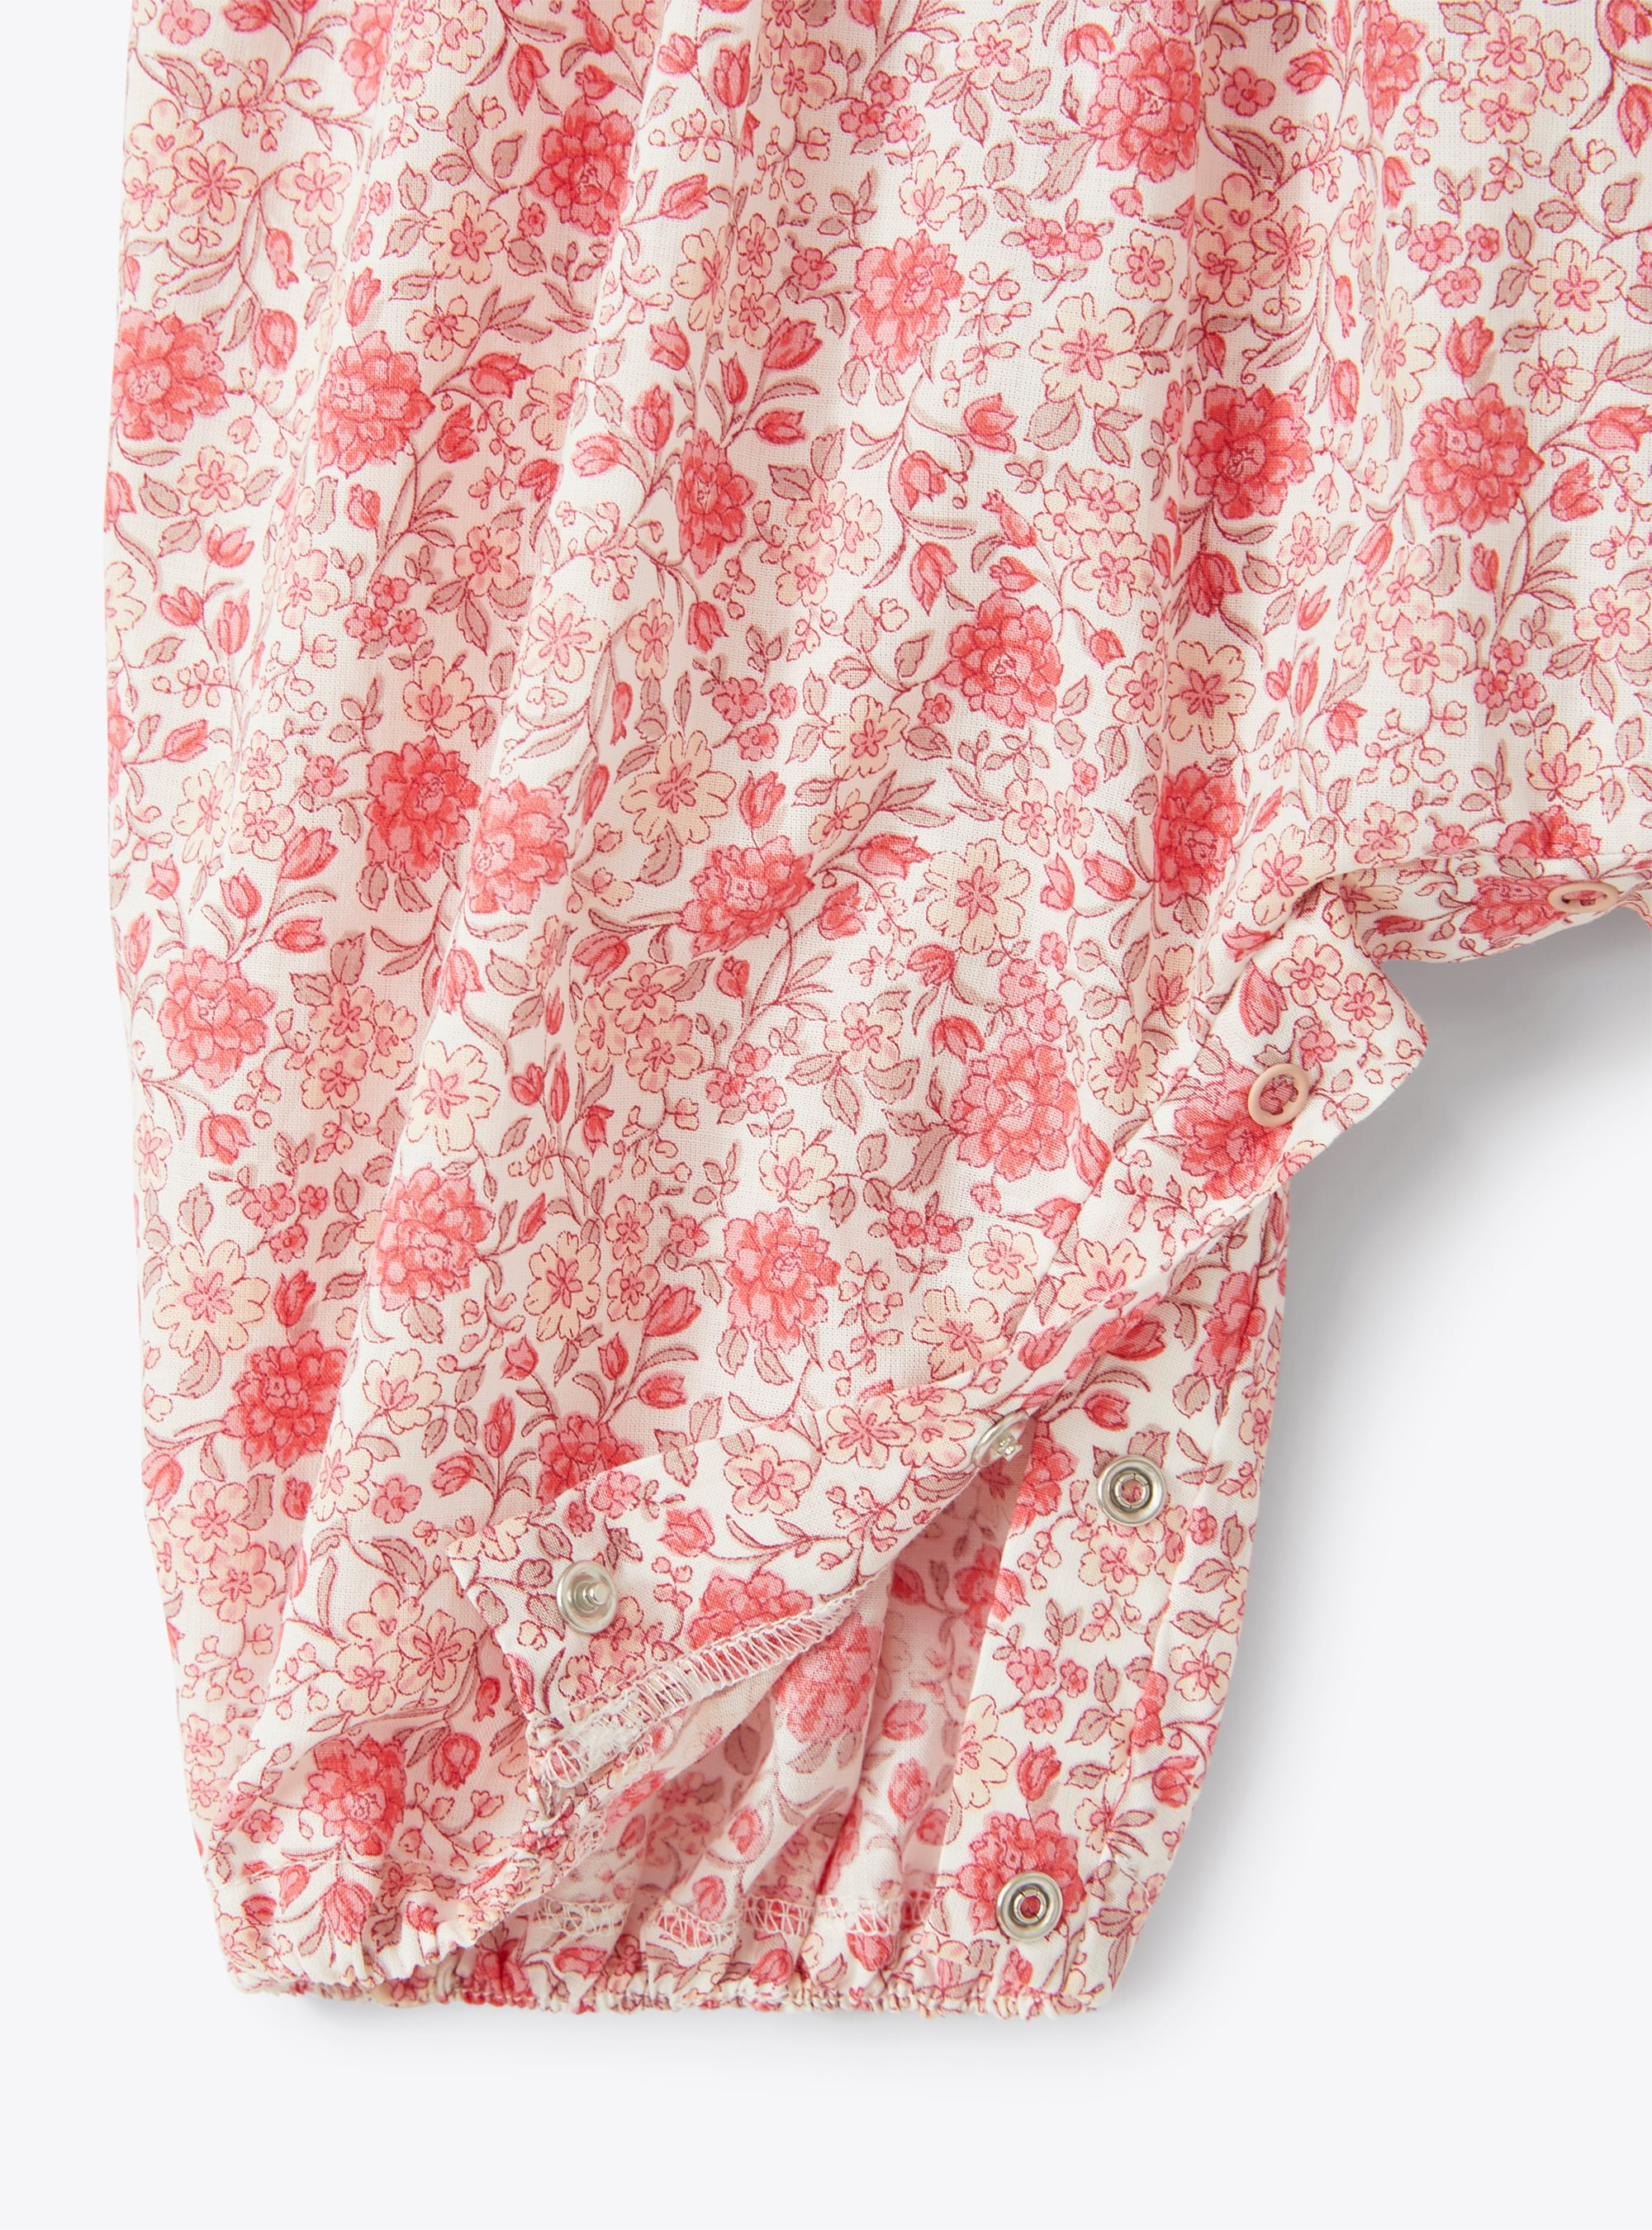 Babysuit in floral-print voile - Red | Il Gufo